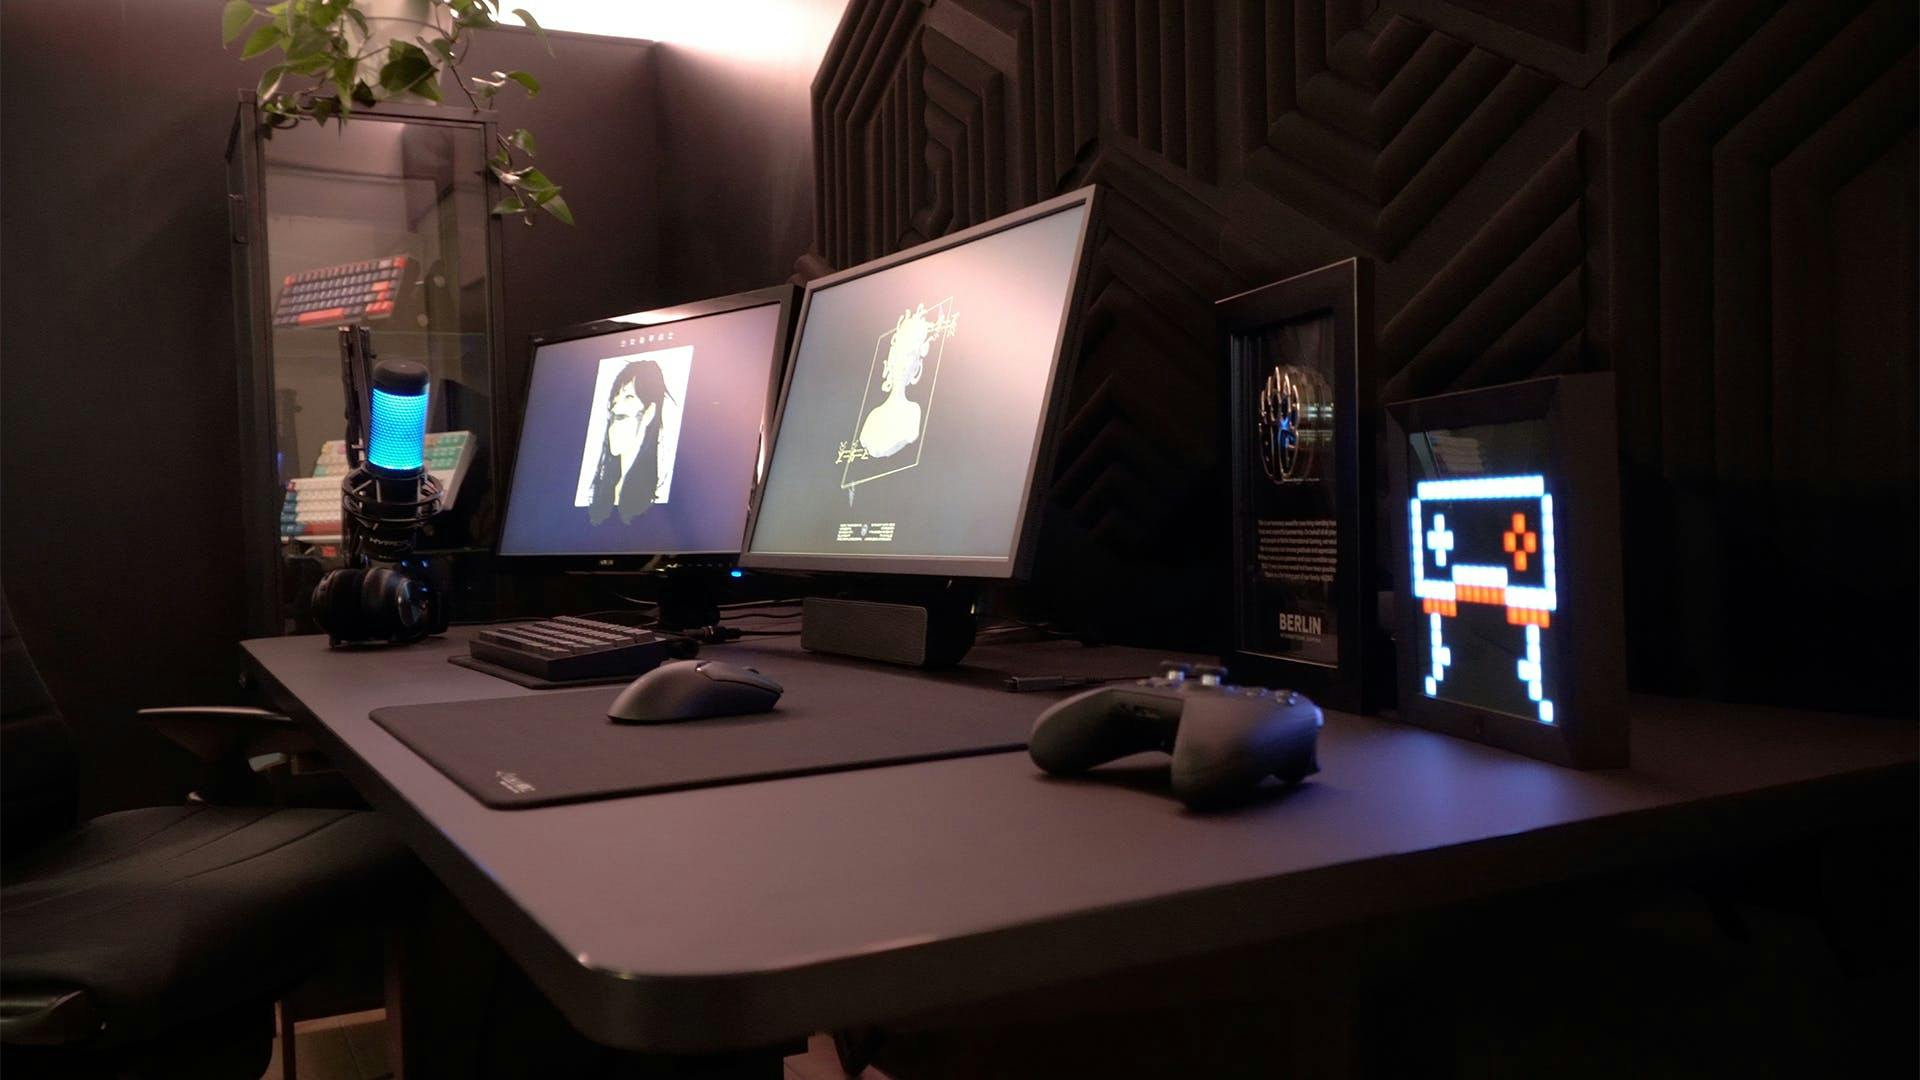 A gaming setup with black elements such as a gaming table, two gaming monitors, a microphone and decoration with LED effects.